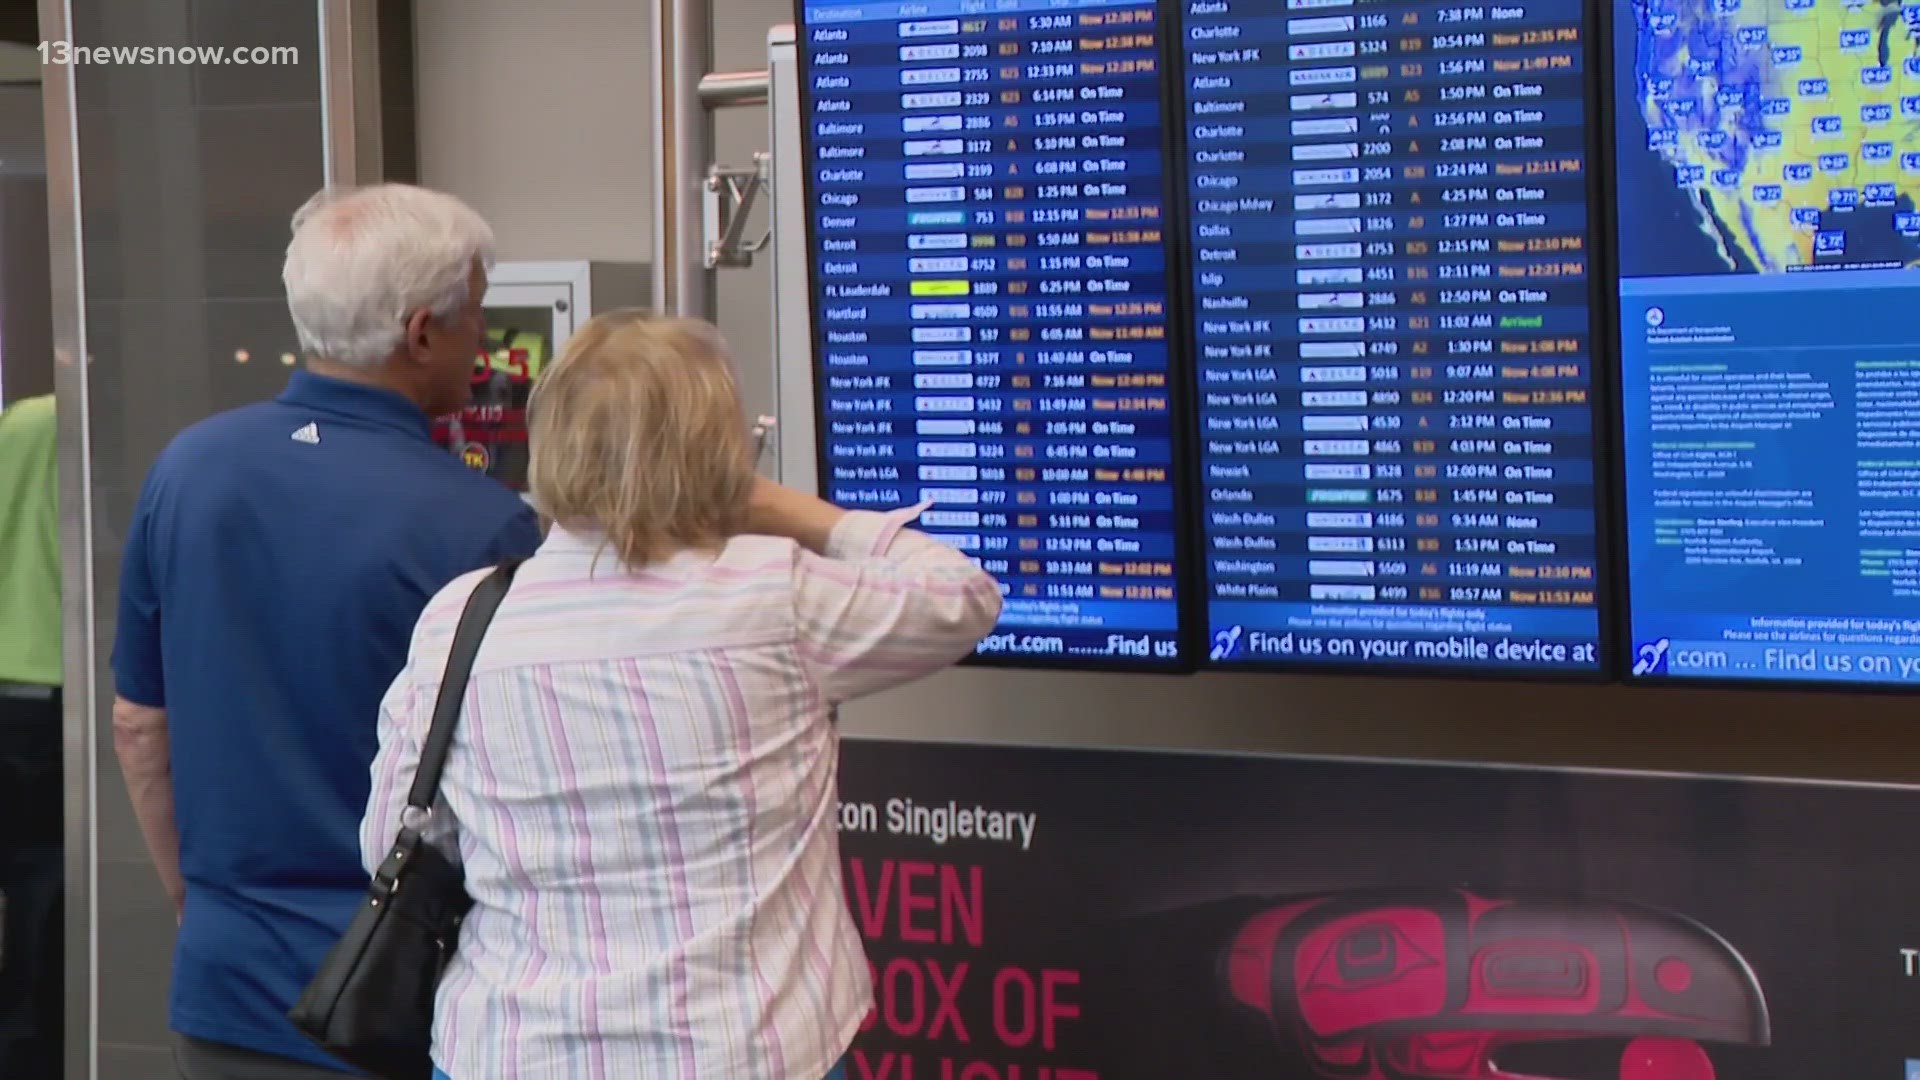 Cancellations and delays are a problem airports up and down the East Coast are seeing after the long holiday weekend.